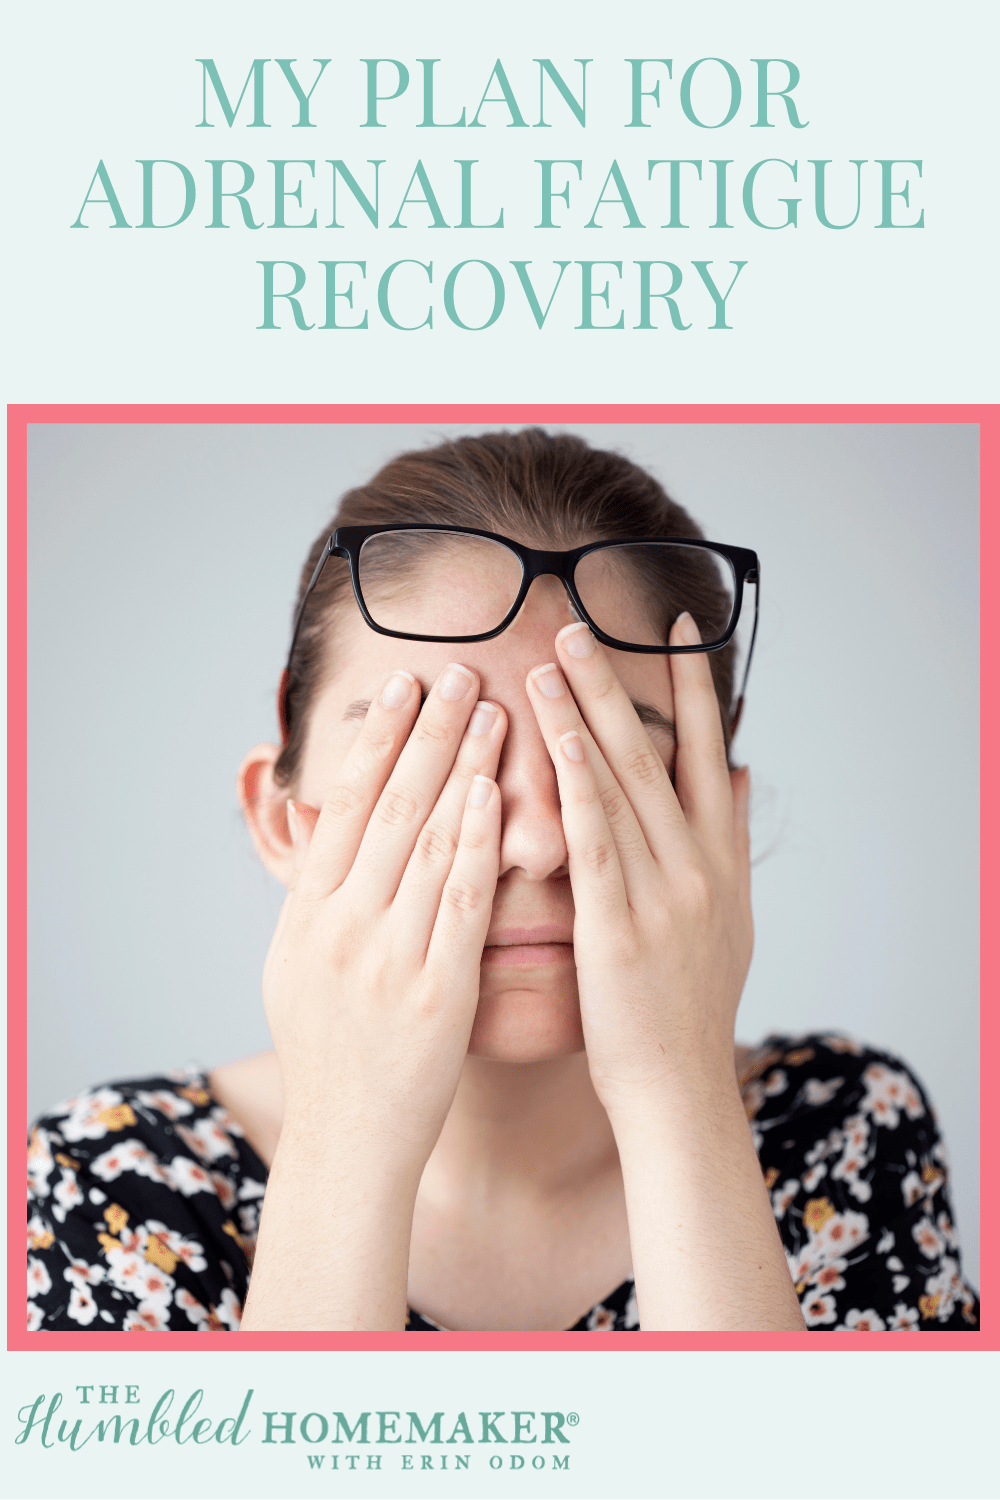 Last week, I shared with you my journey to adrenal fatigue. Today I’m sharing my personal plan for adrenal fatigue recovery.